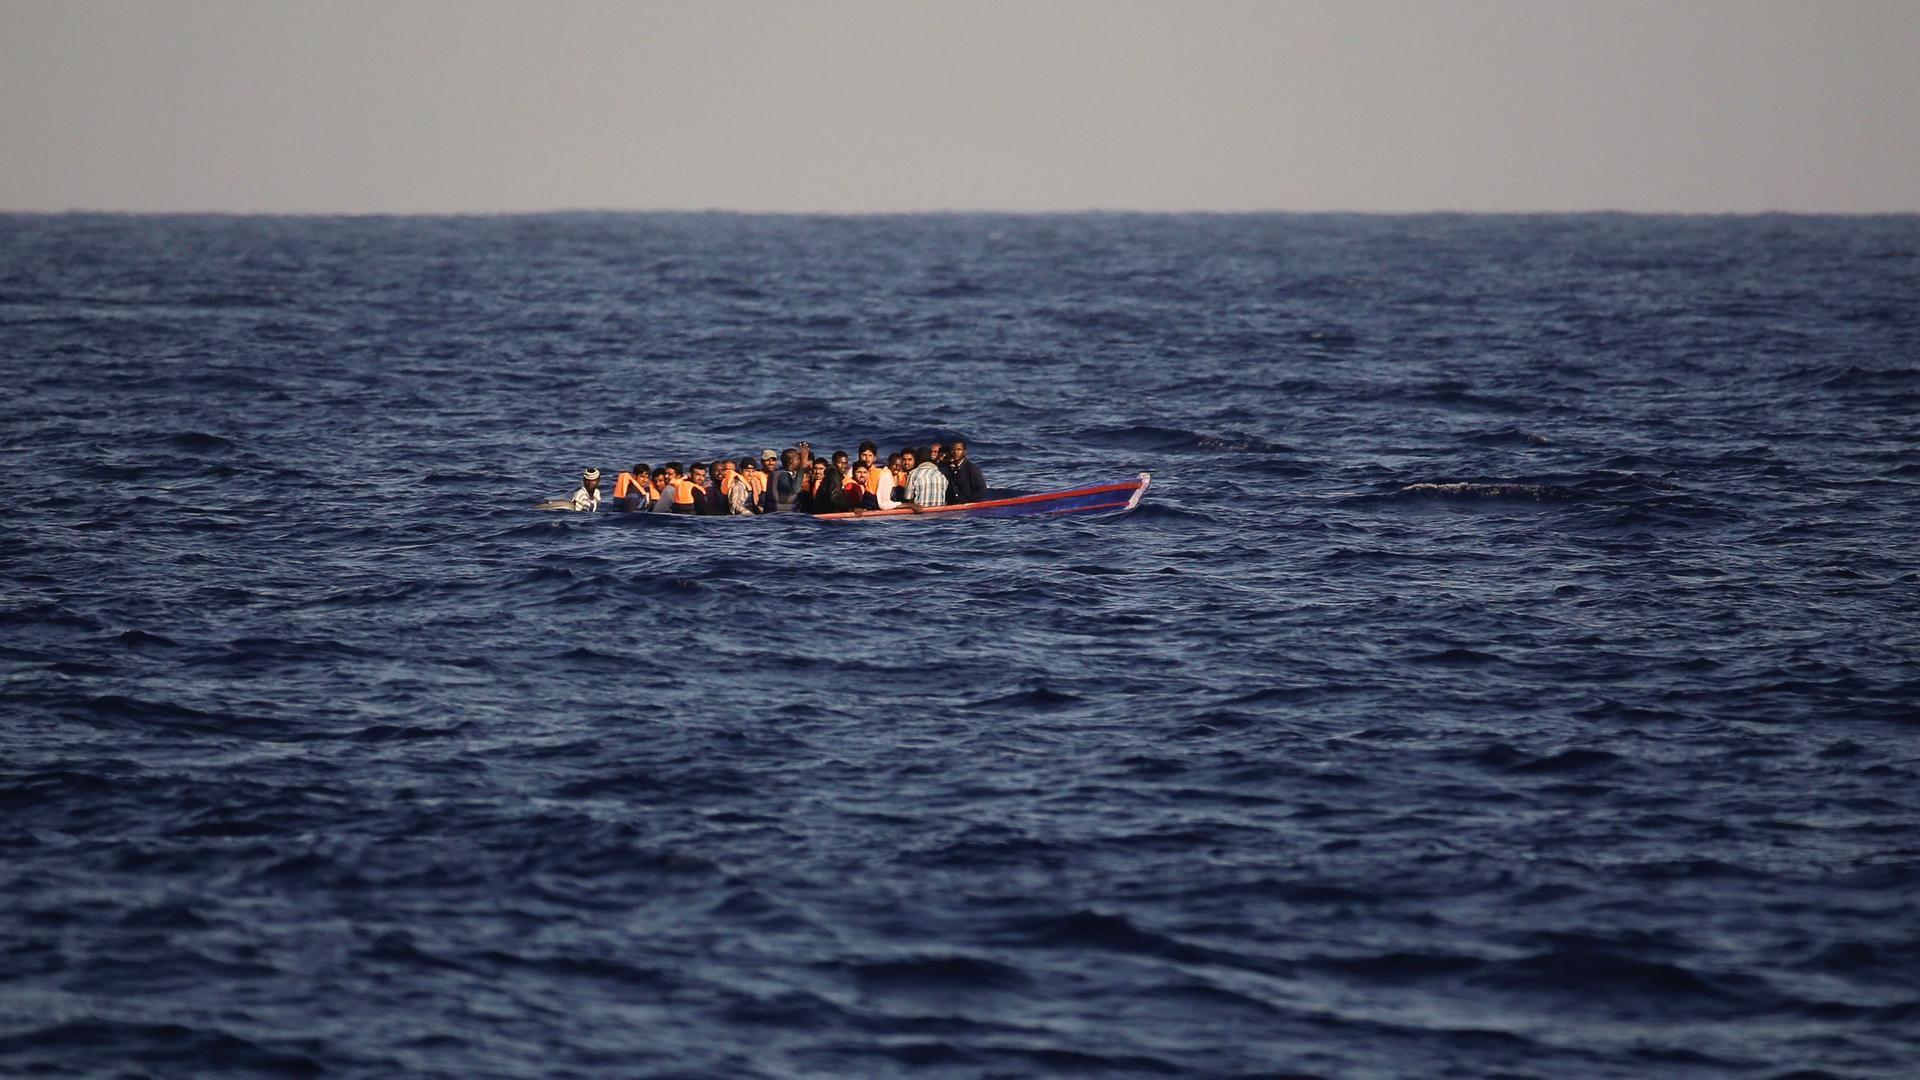 A group of people crowded onto a small open boat in the deep blue sea